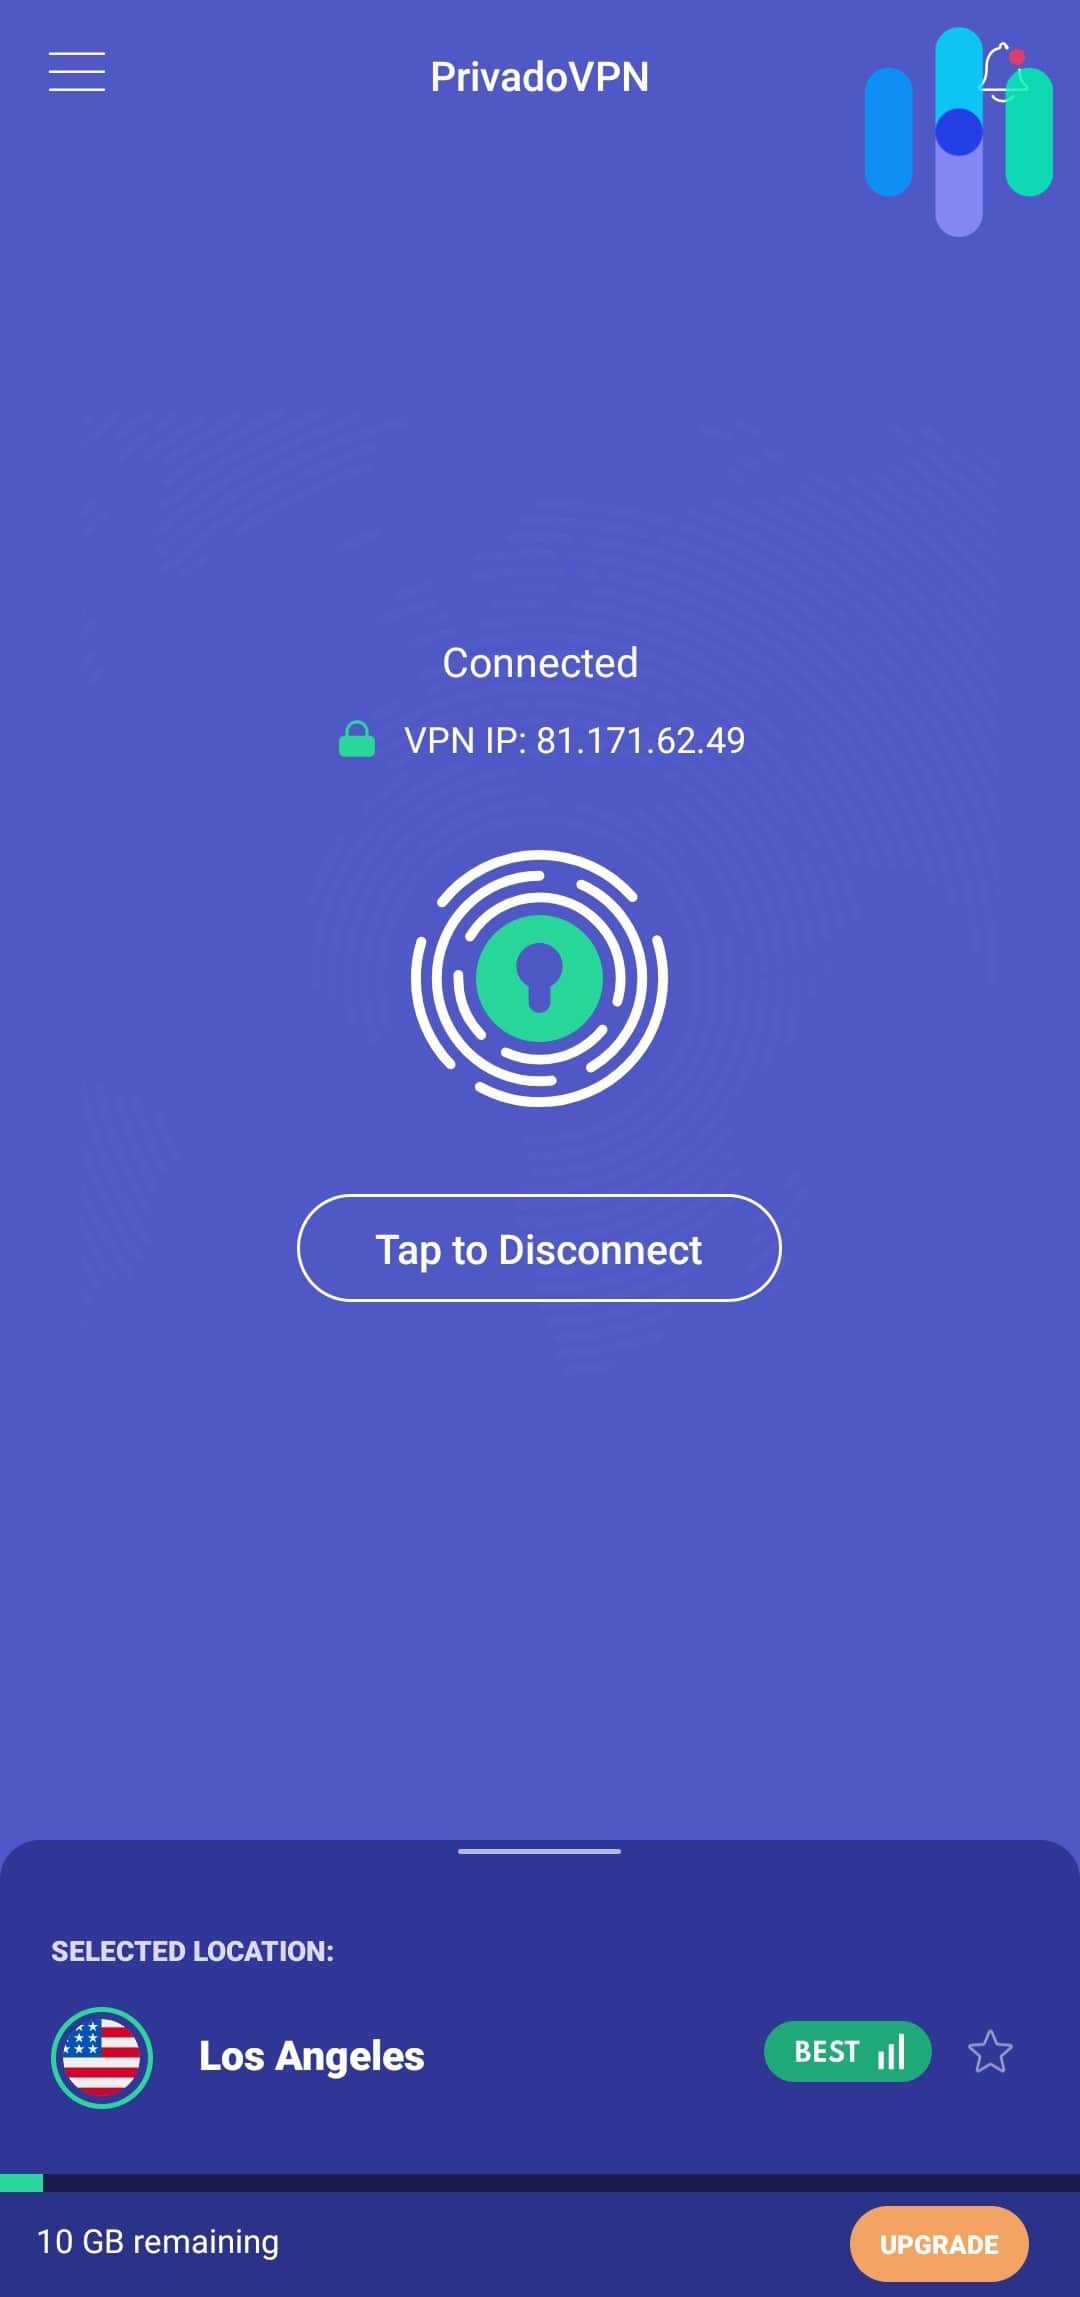 PrivadoVPN free version with 10 GB monthly data limit